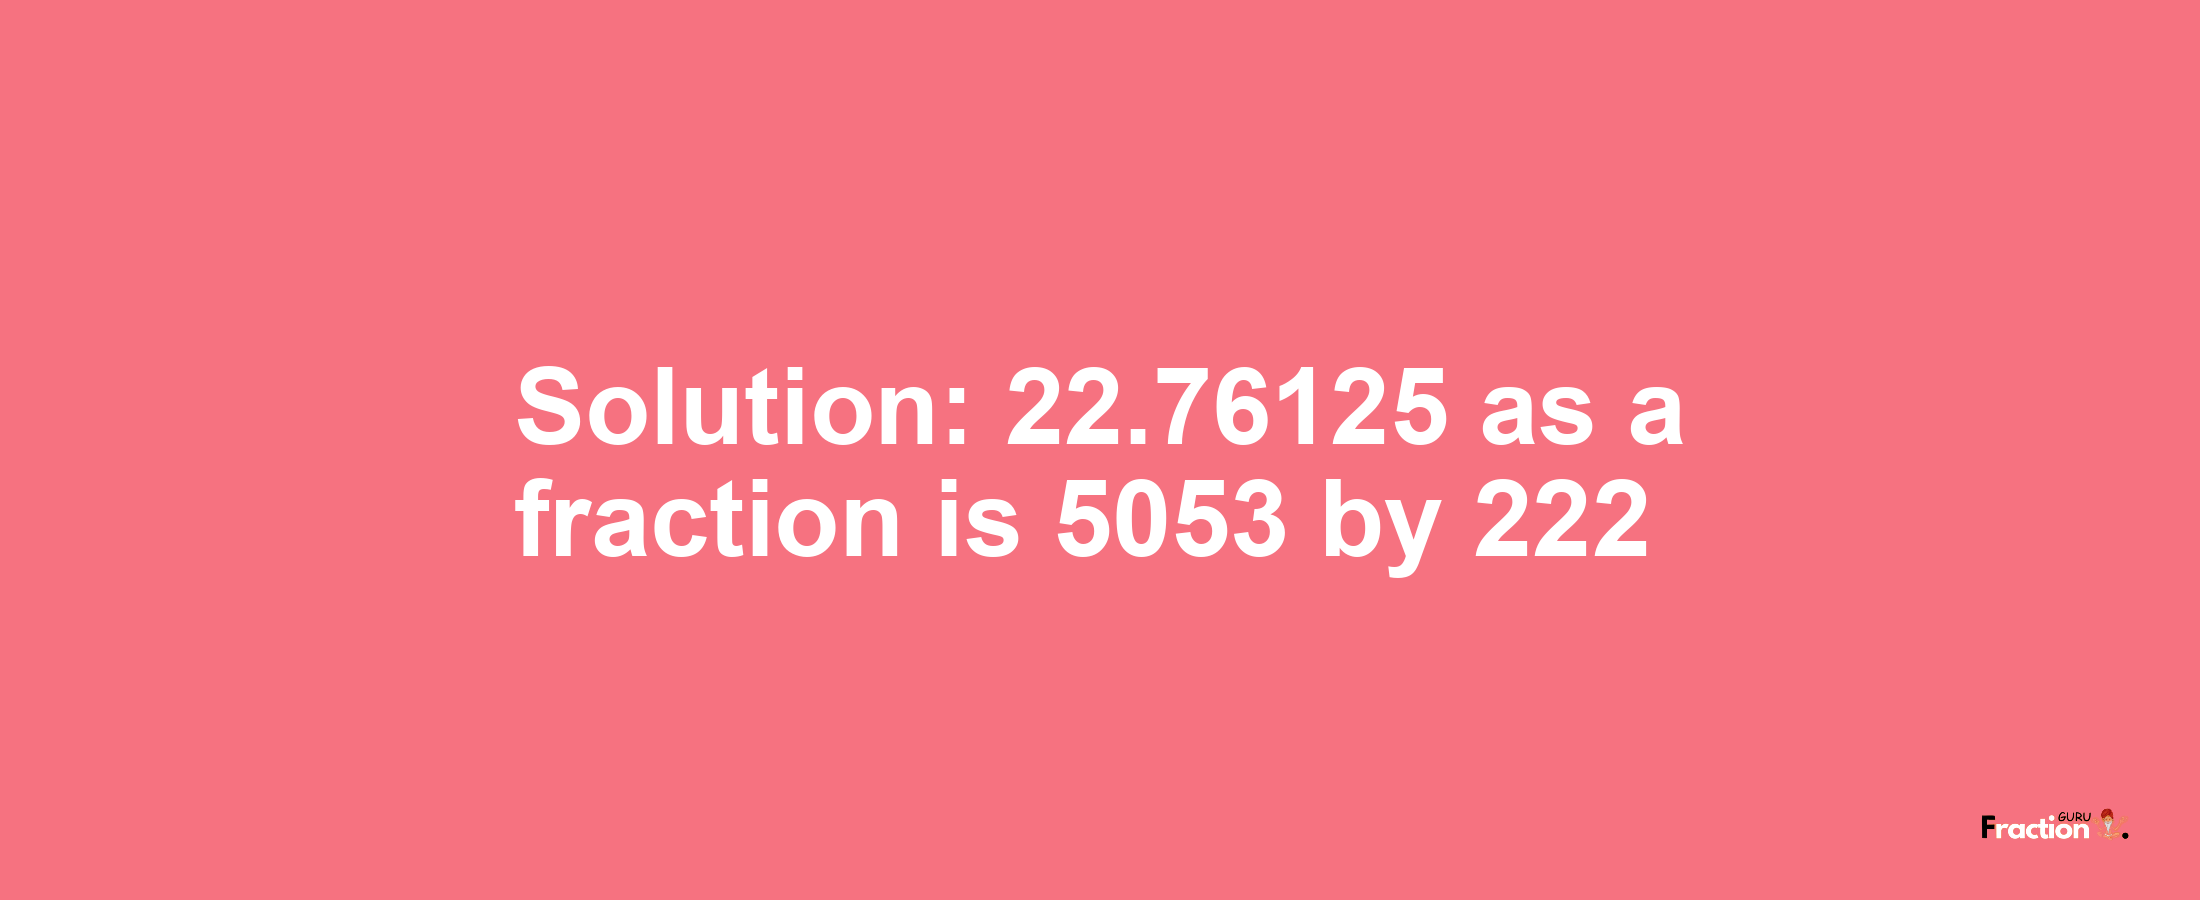 Solution:22.76125 as a fraction is 5053/222